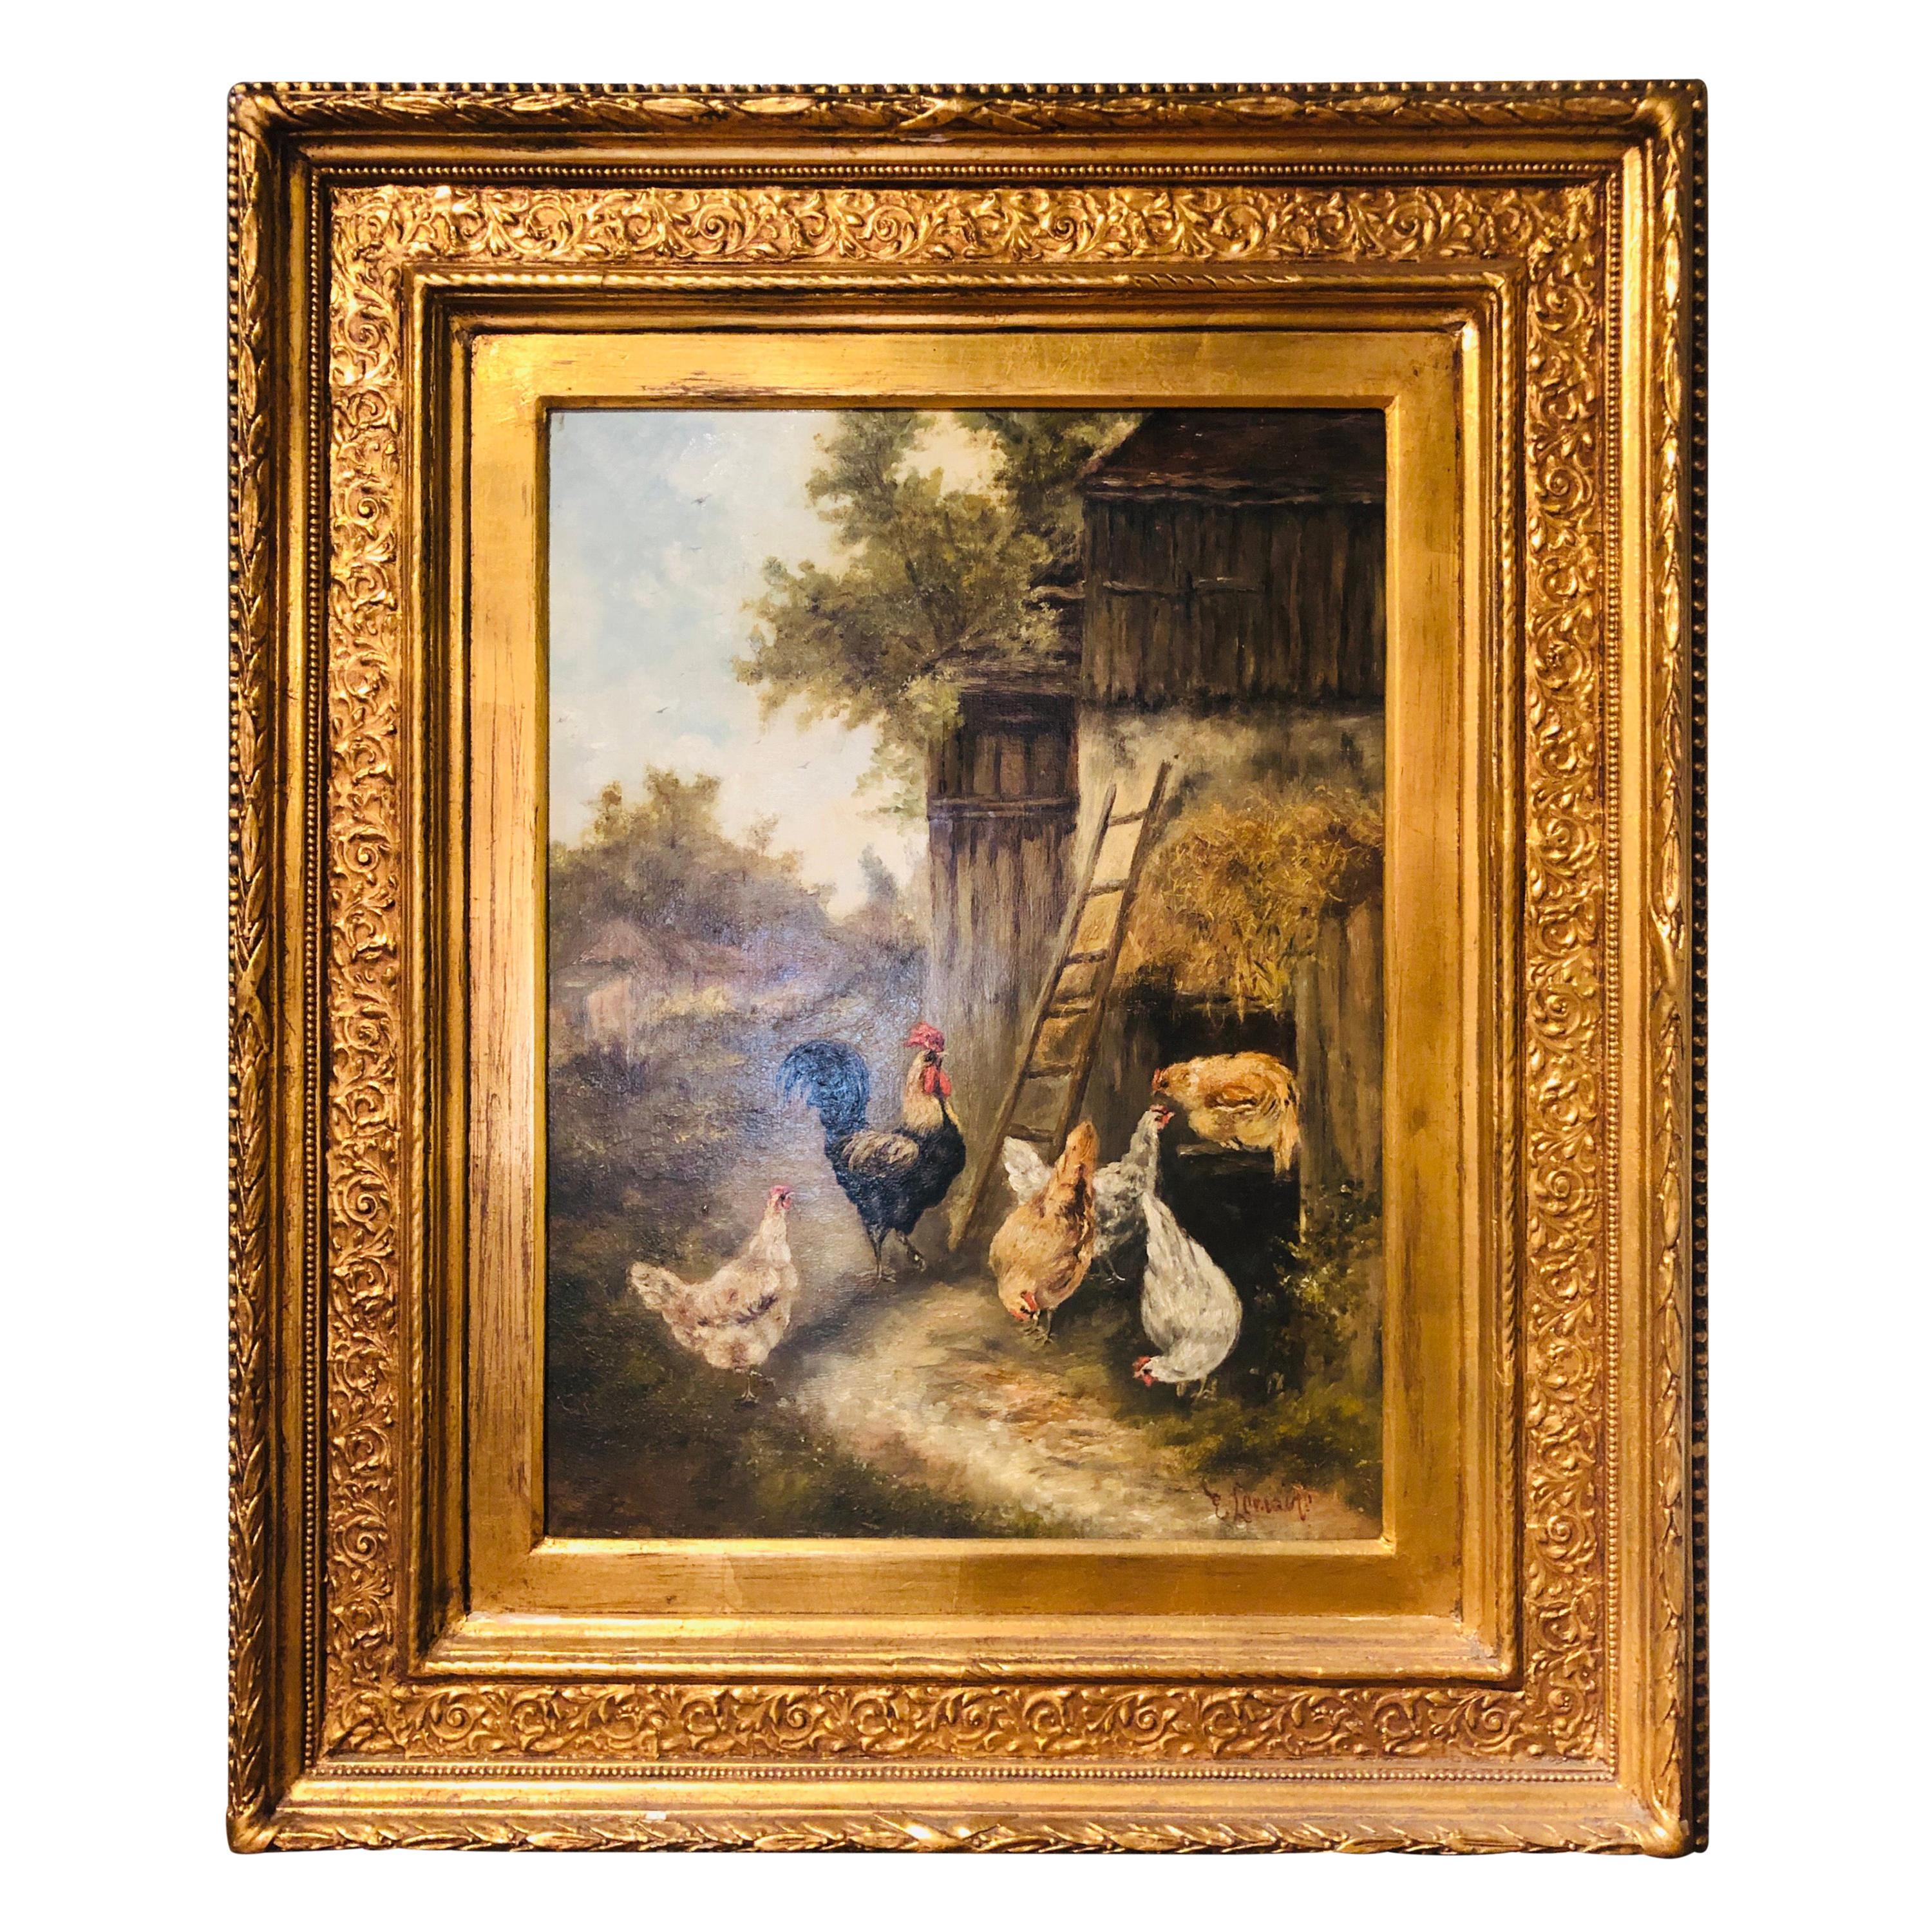 Signed 19th Century French Oil Painting on Canvas